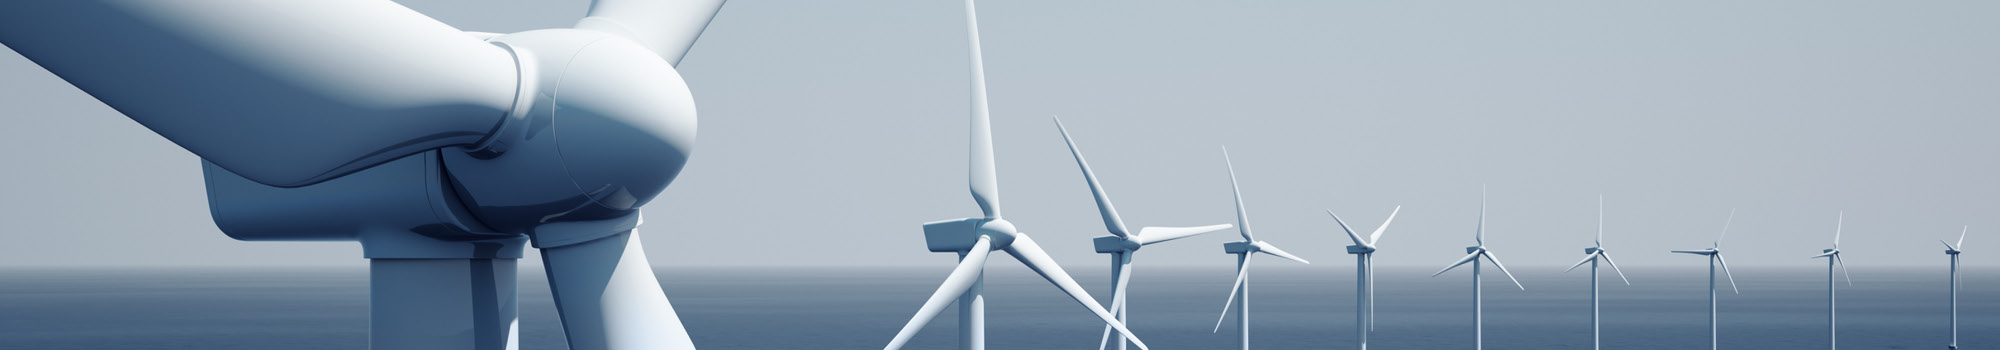 Image of a wind farm out at sea